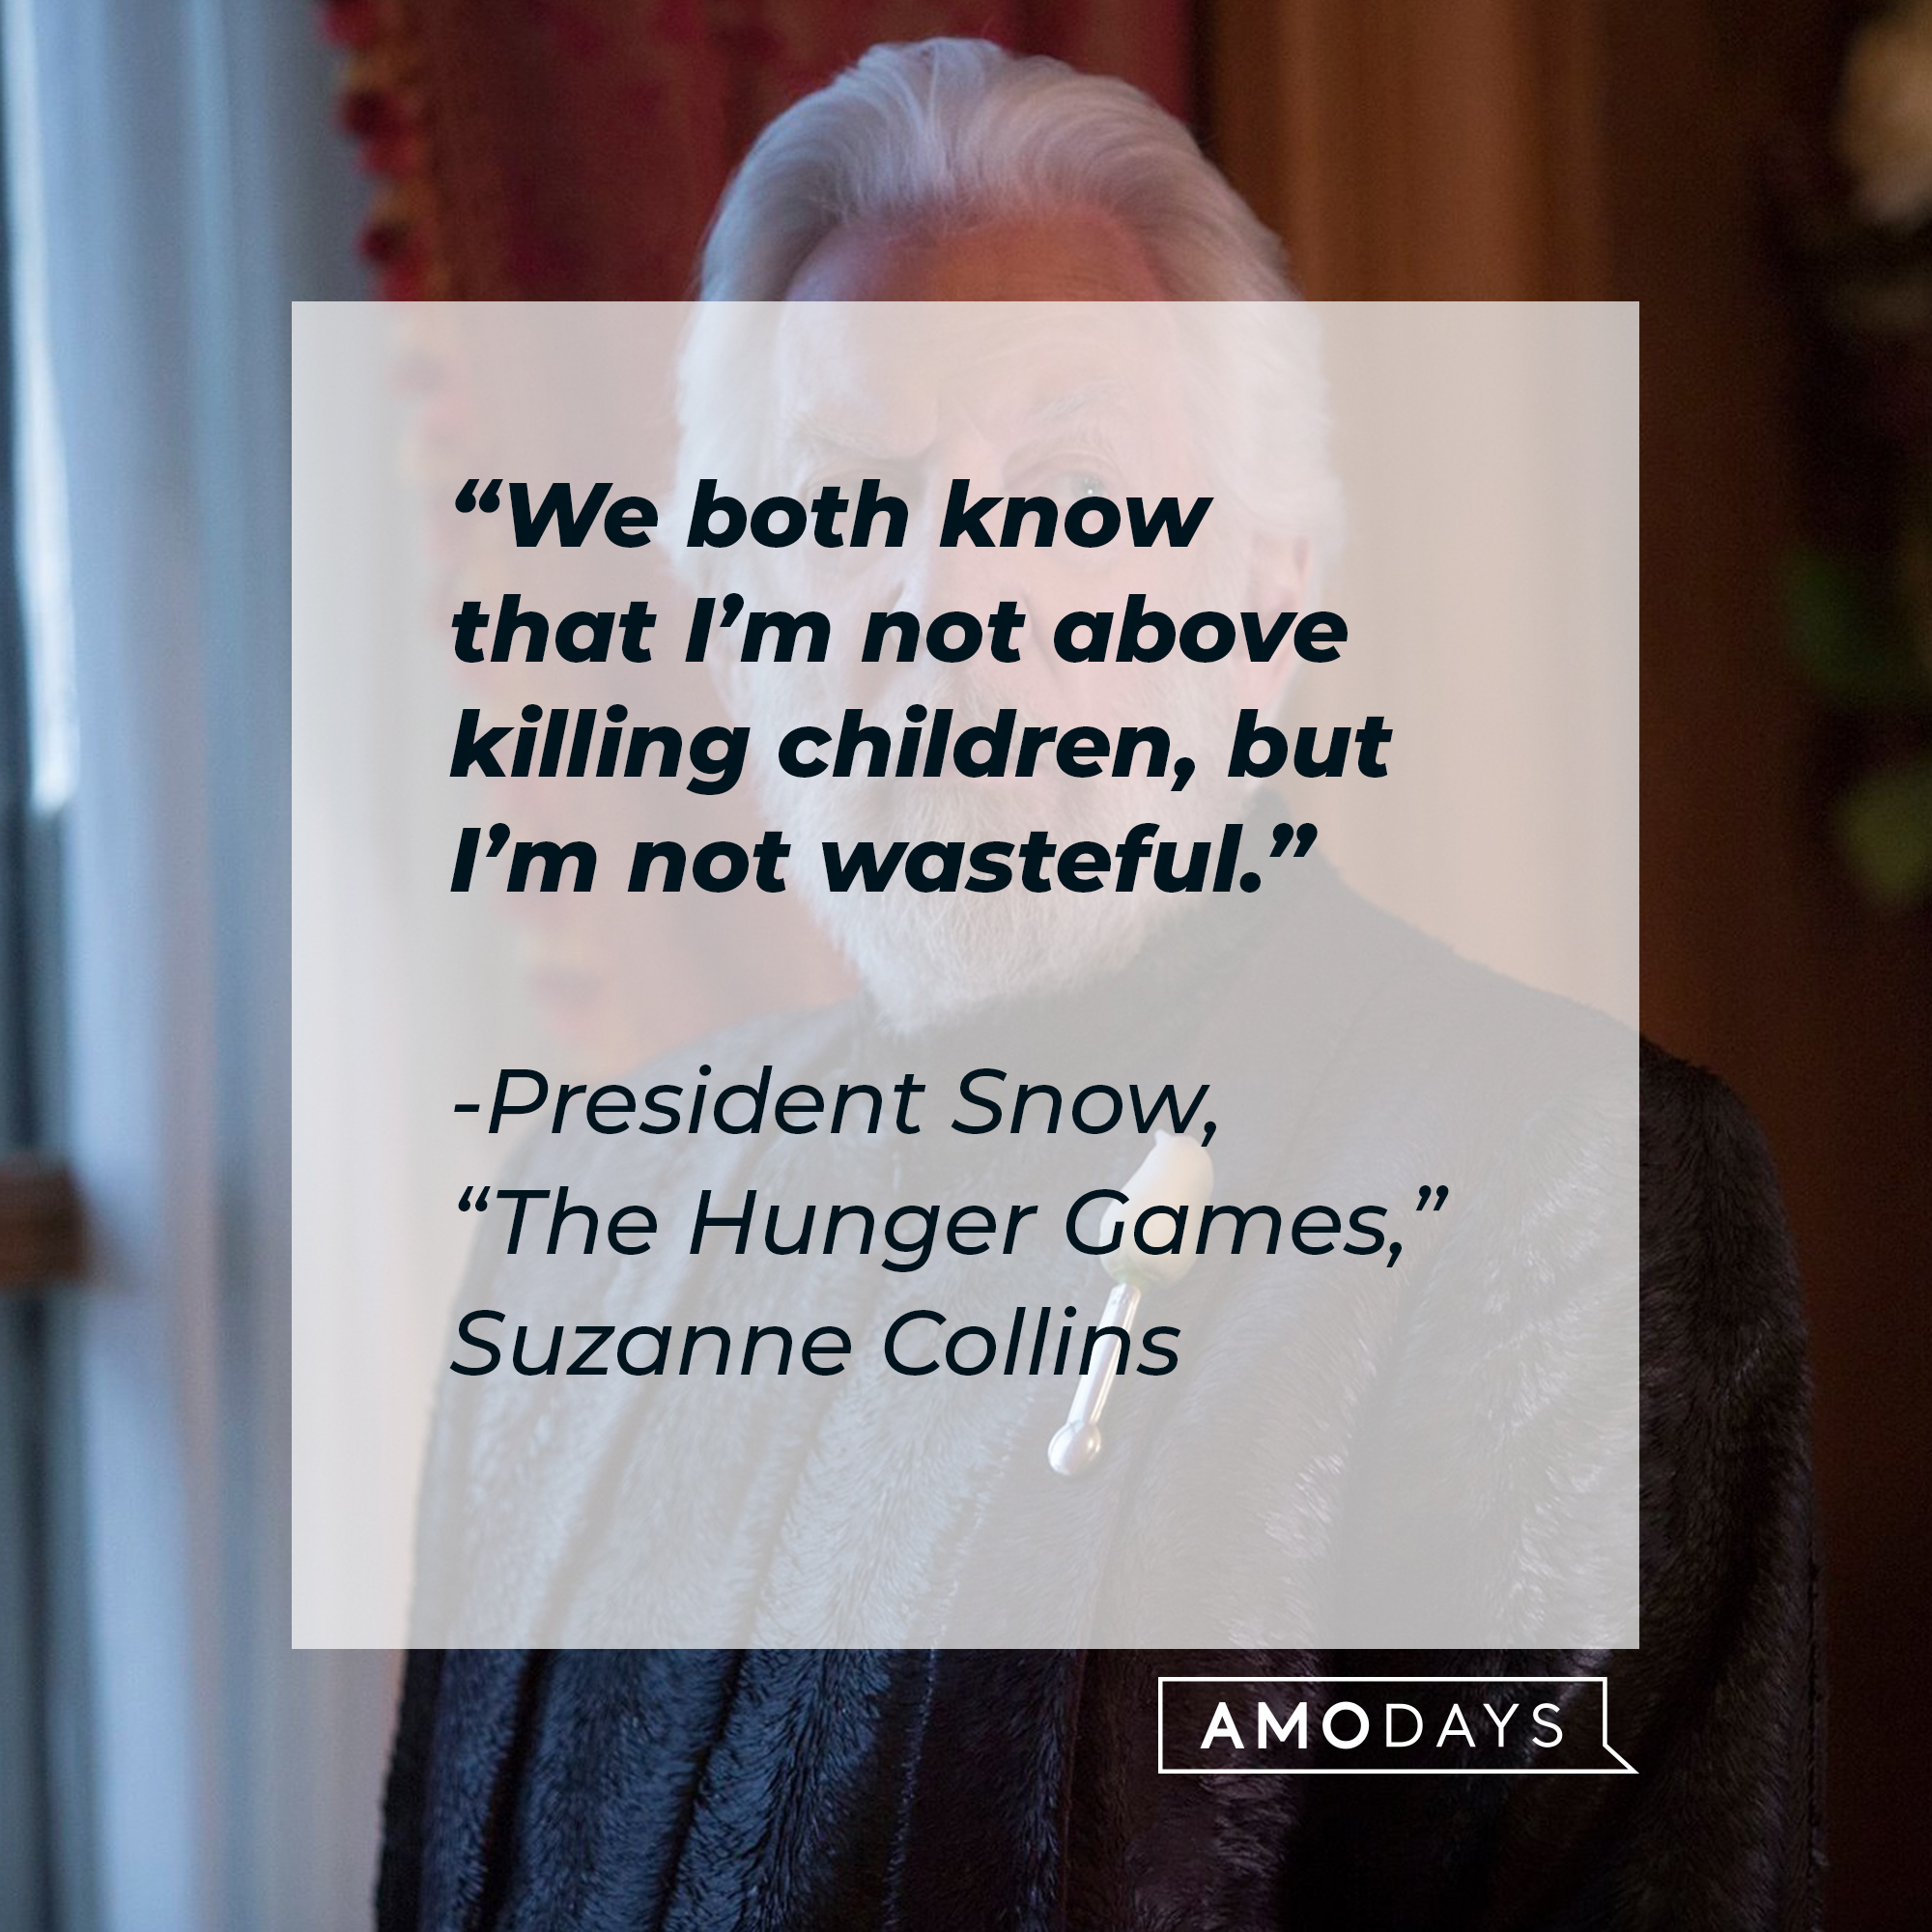 President Snow, with his quote from Suzanne Collins’ “Hunger Games,”: “We both know that I’m not above killing children, but I’m not wasteful.”  | Source: facebook.com/TheHungerGamesMovie